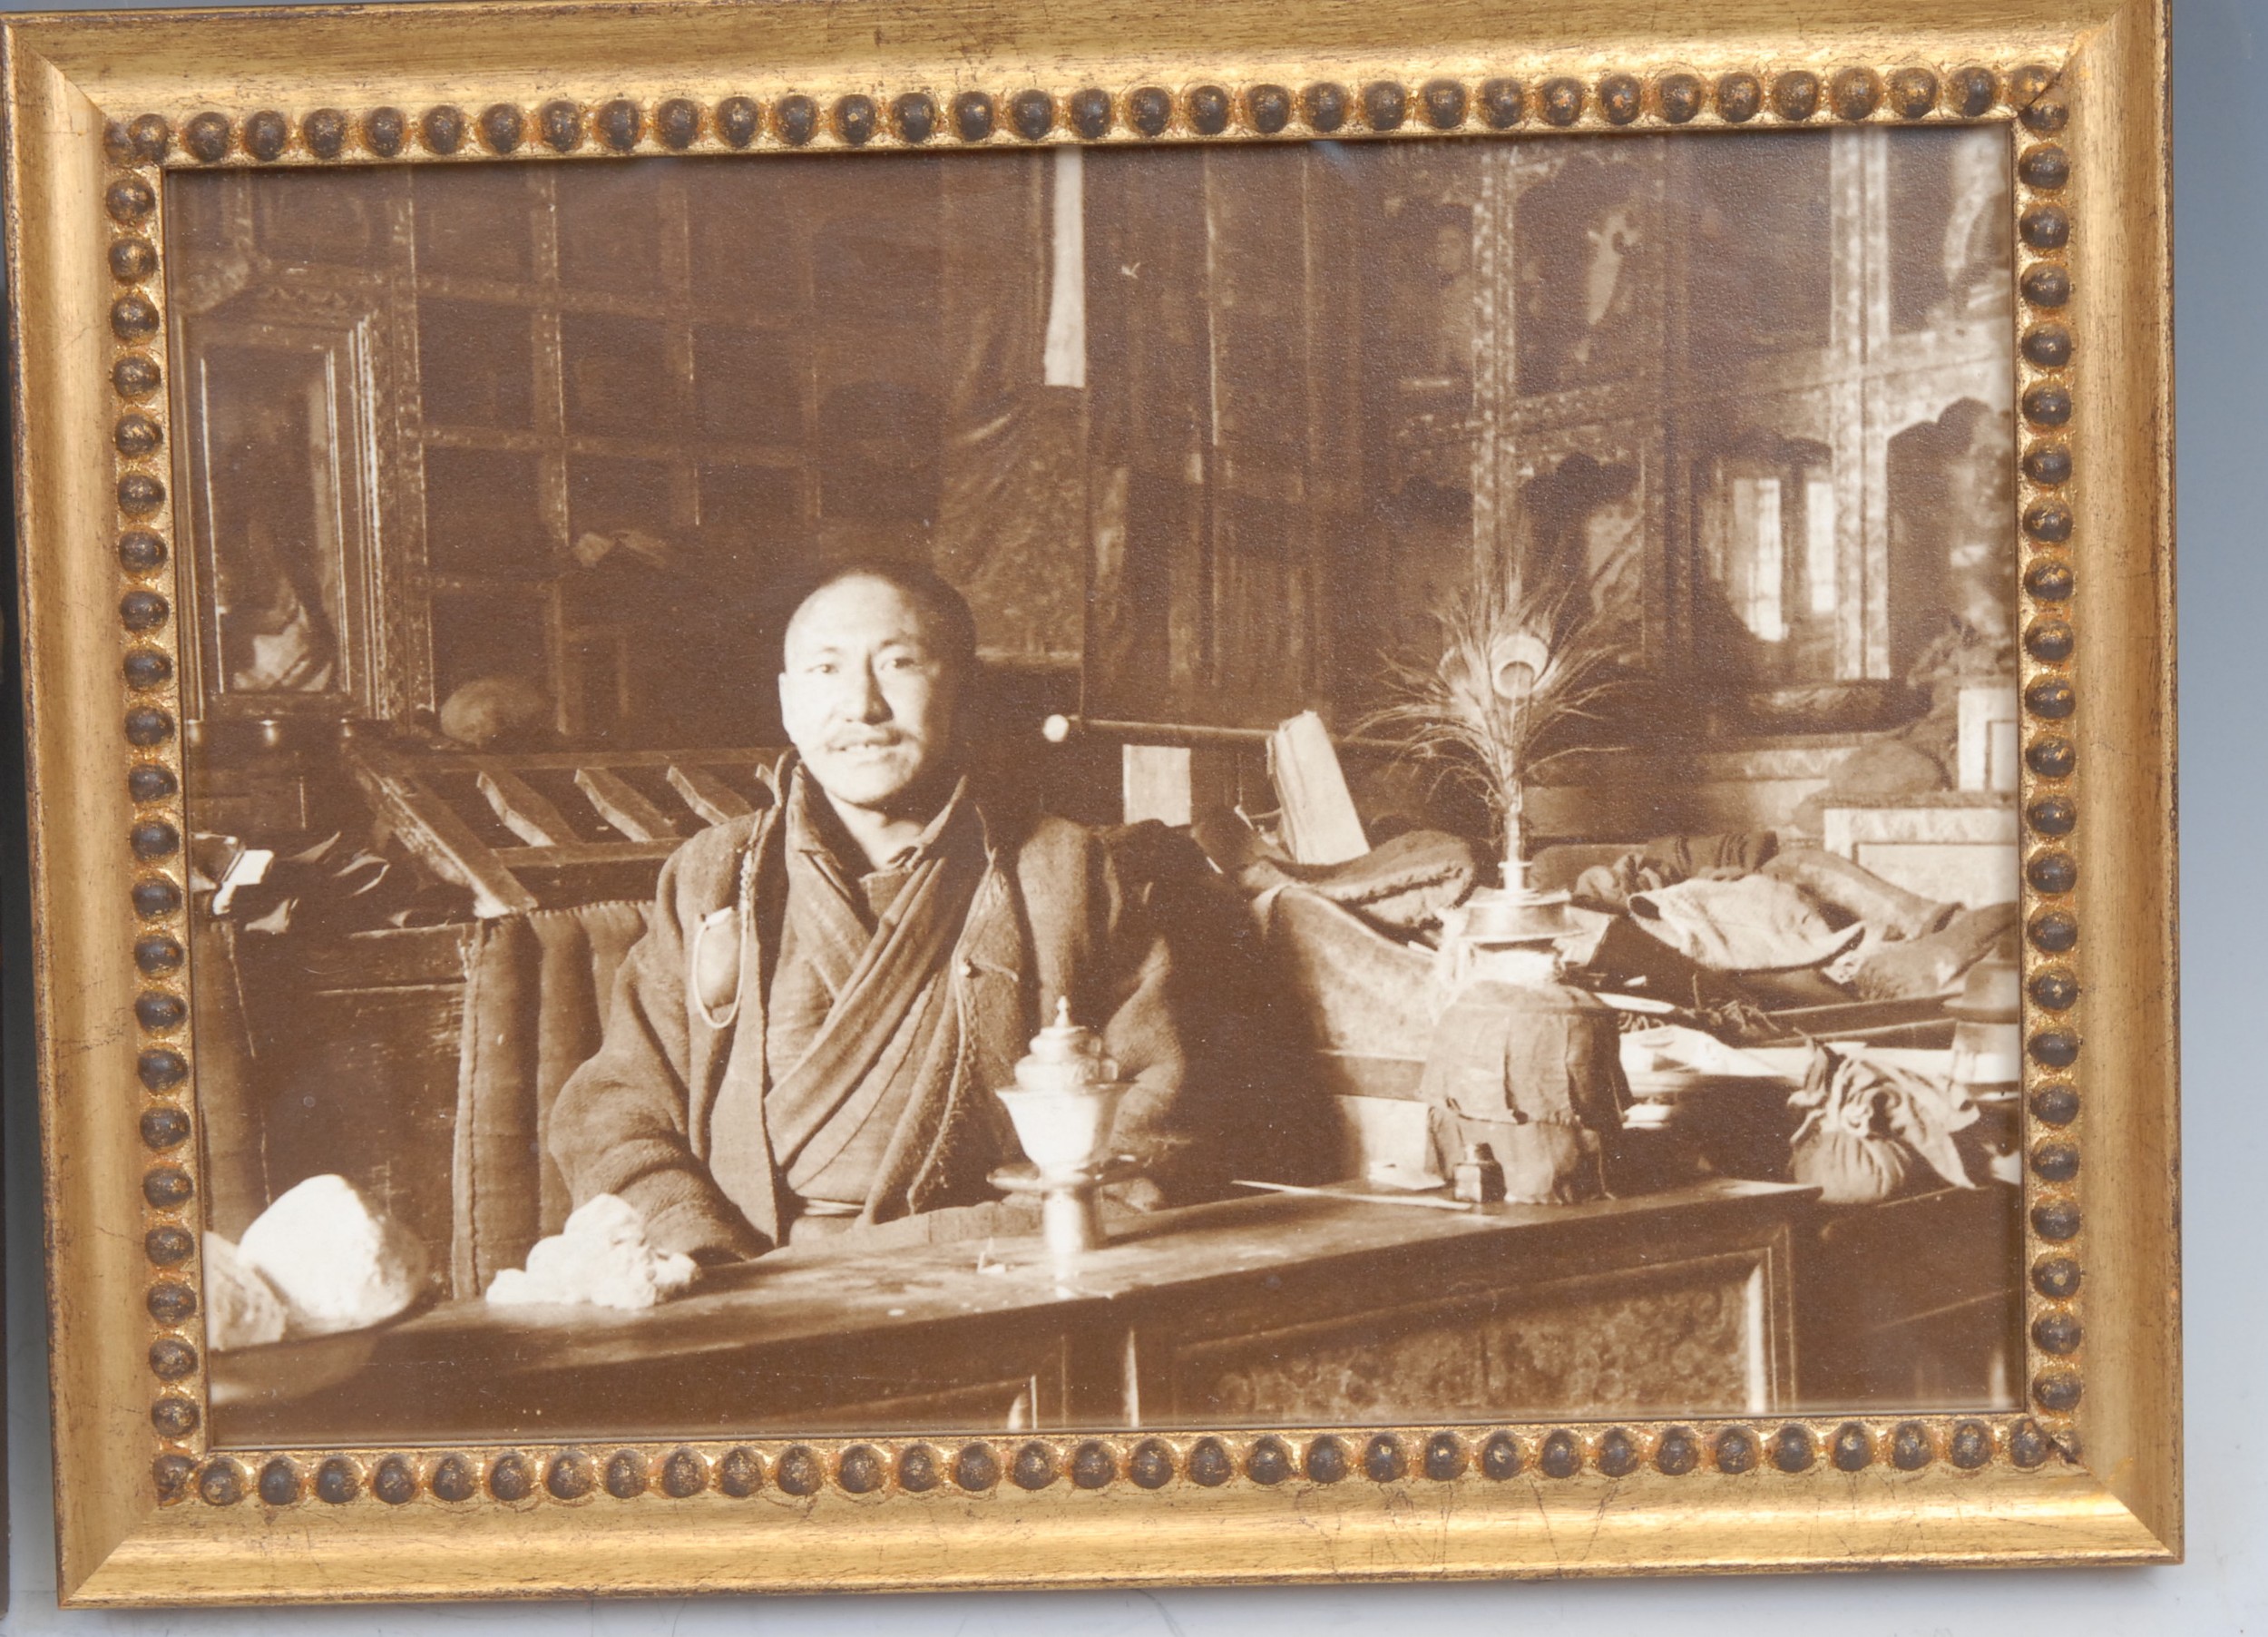 China and Tibet - a b/w portrait photograph of a Buddhist abbot, possibly that of Thrangu Monastery, - Image 2 of 3